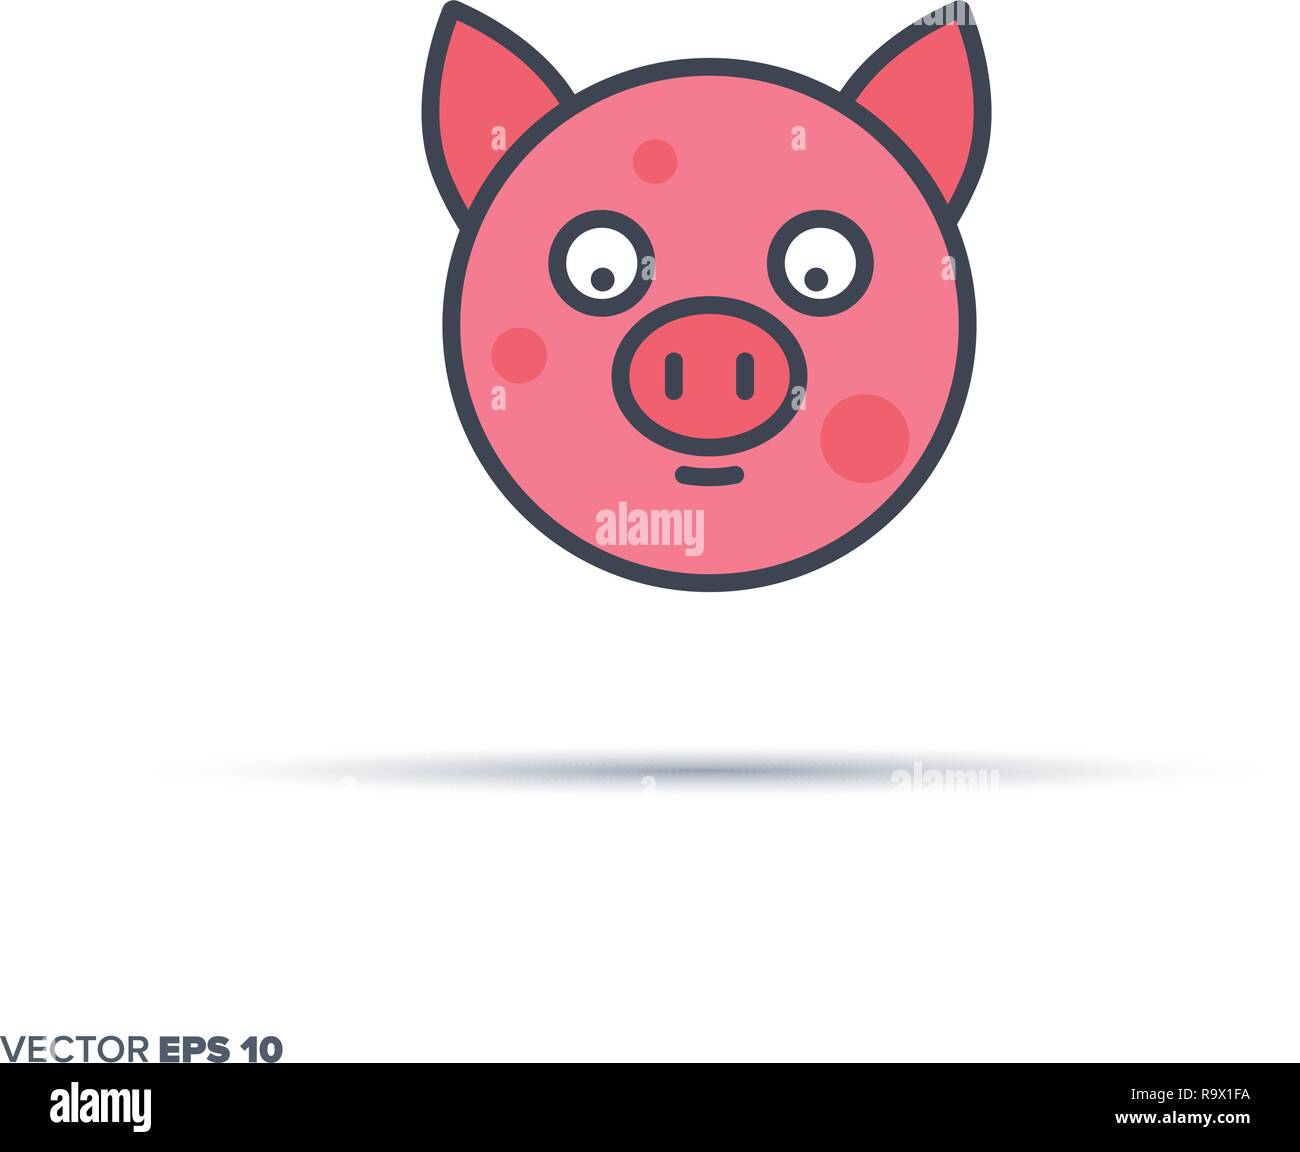 Cute pig face outline vector icon with color fill. Funny animal illustration. Stock Vector